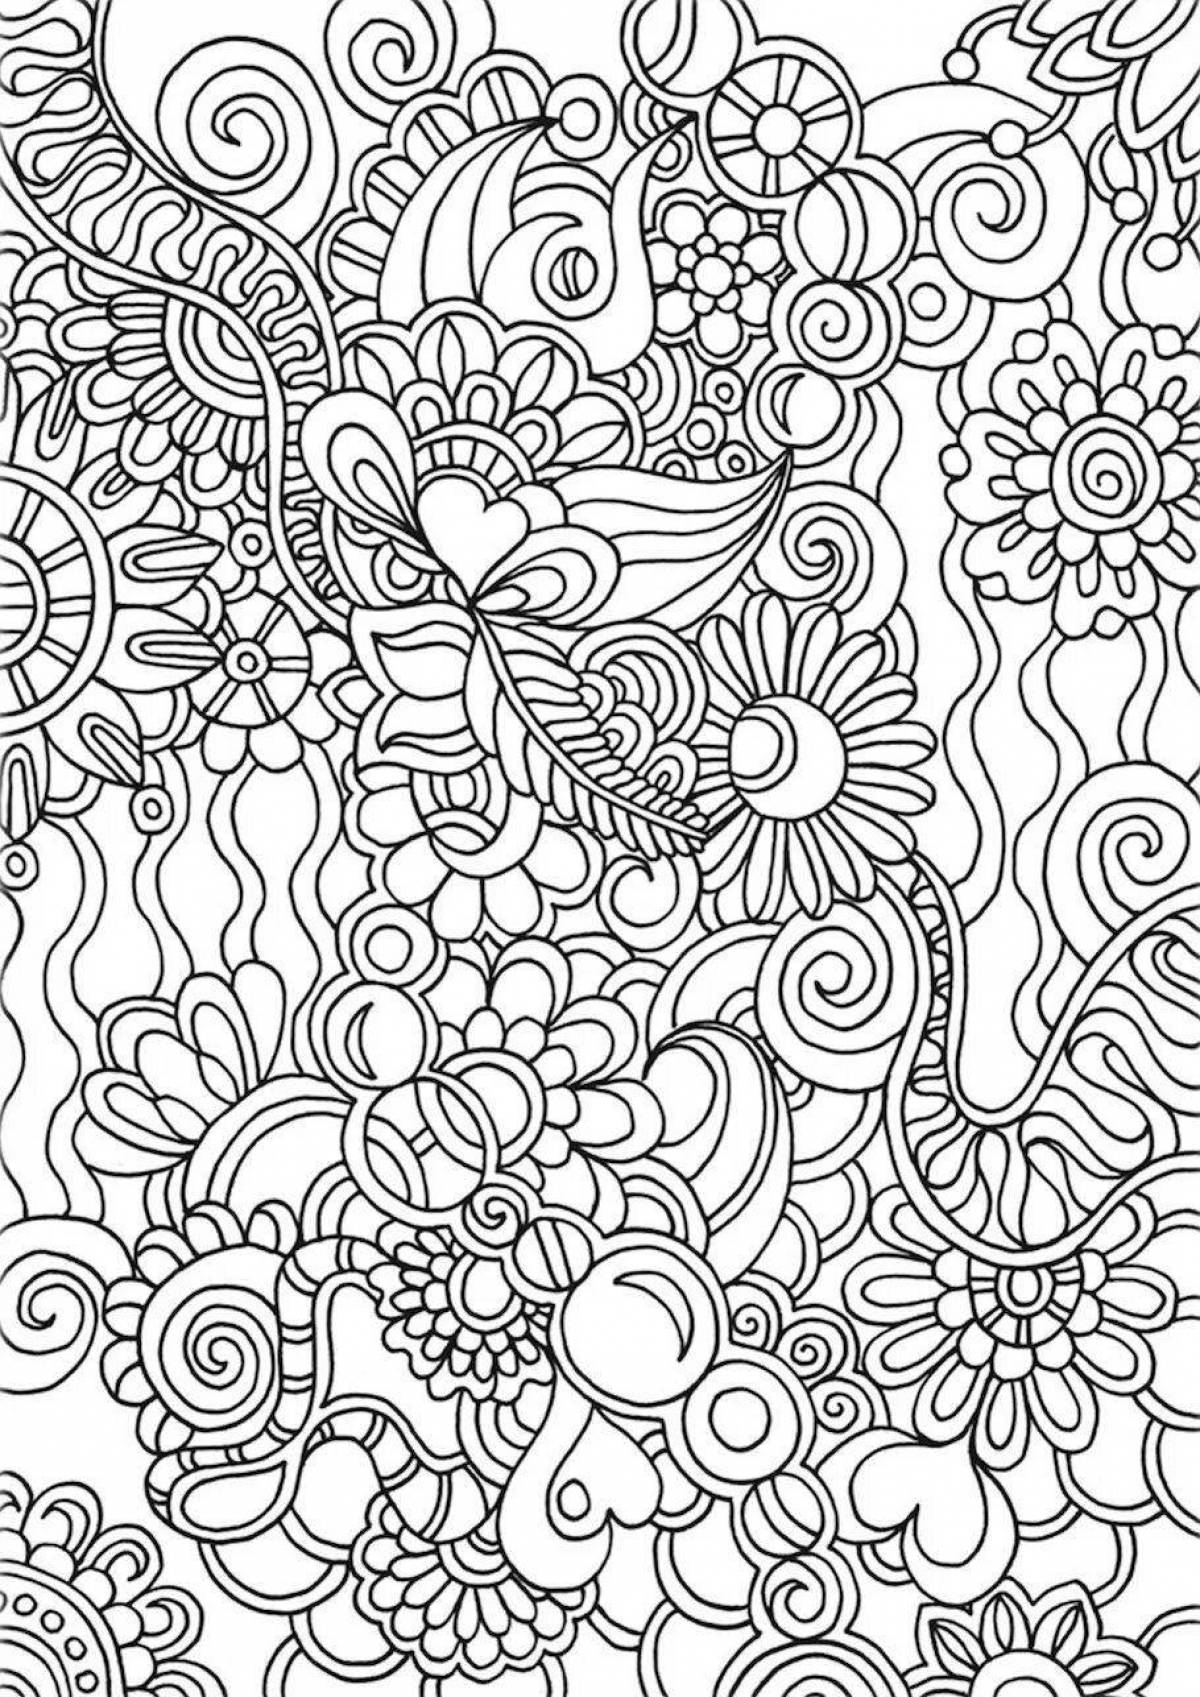 Mysterious soothing coloring pages